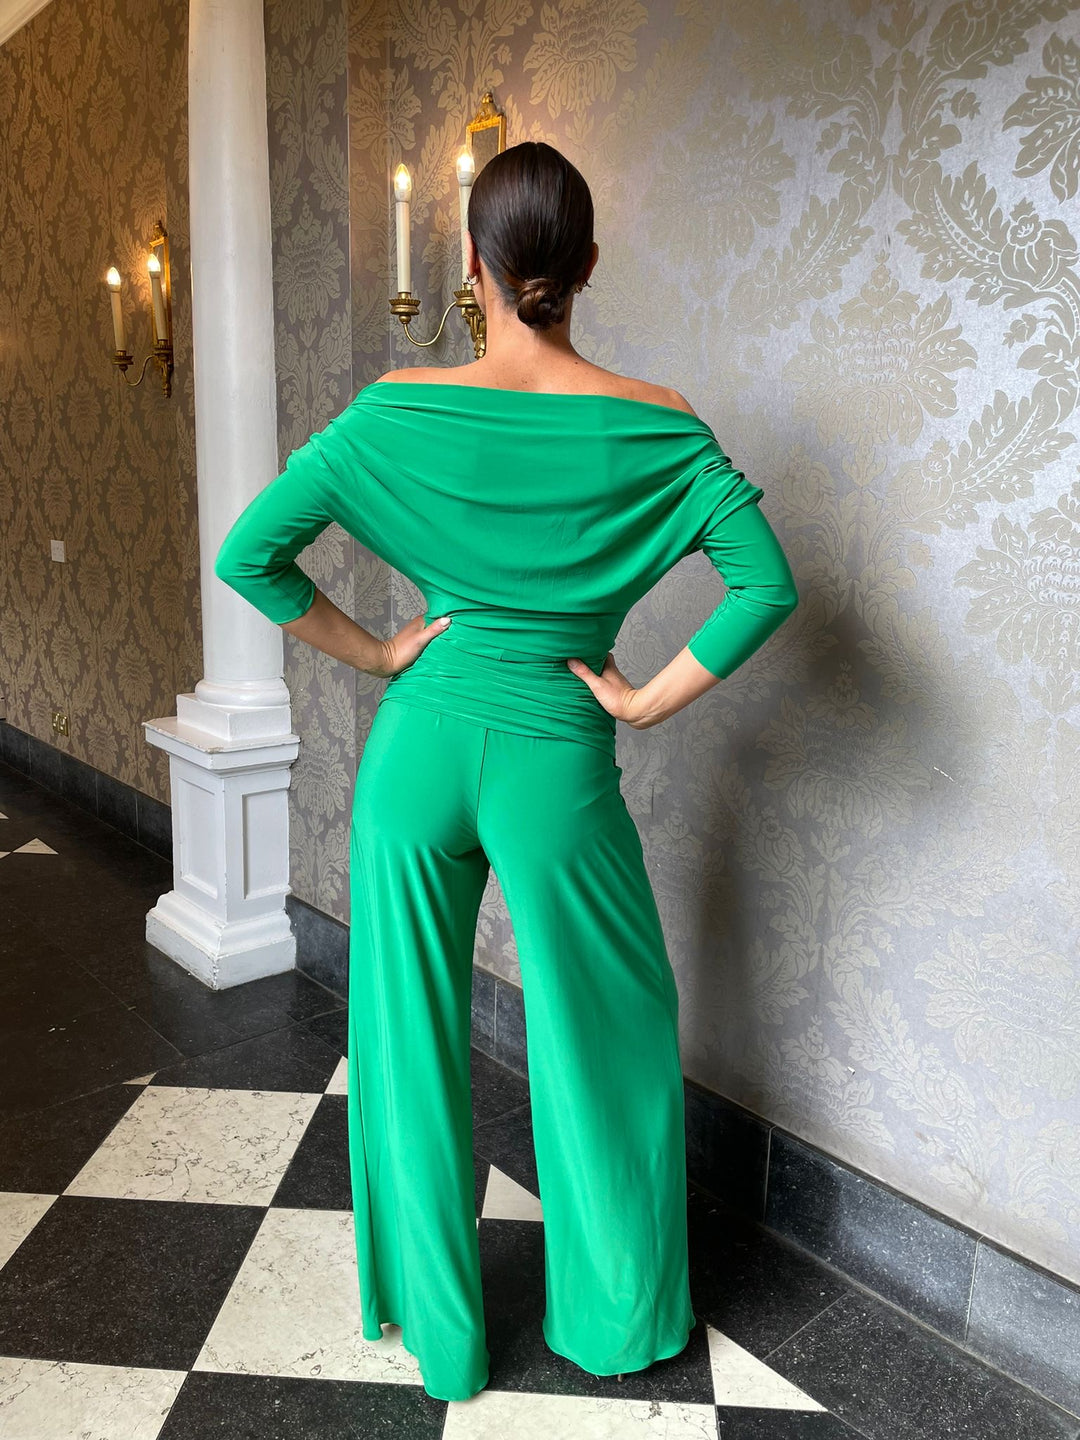 ATOM LABEL carbon jumpsuit with sleeve in emerald green